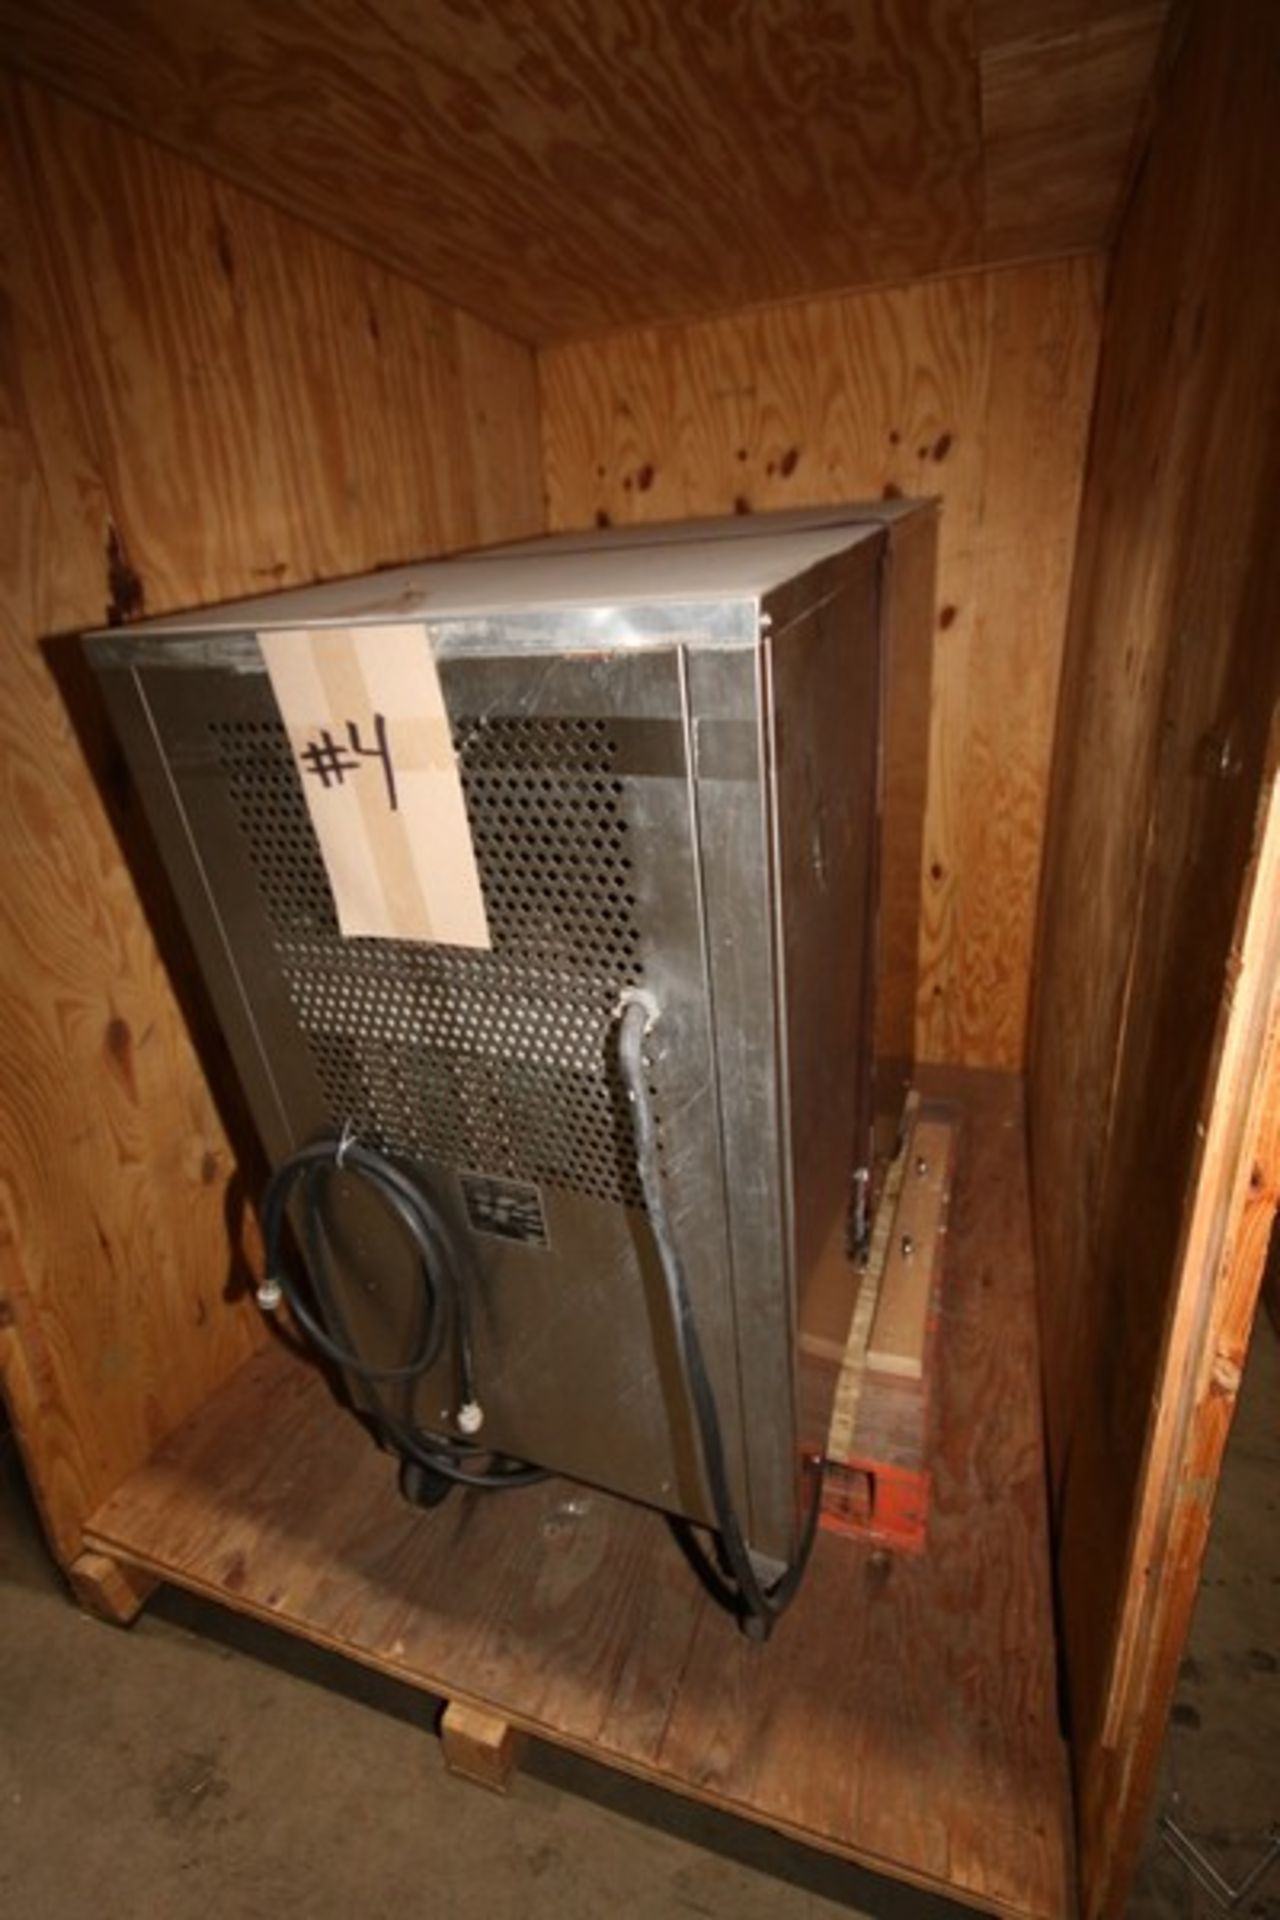 Energy Thompson S/S Ice Cream Freezer, M/N 309, S/N 3500, 280/230 Volts, 3 Phase, Mounted on - Image 6 of 8